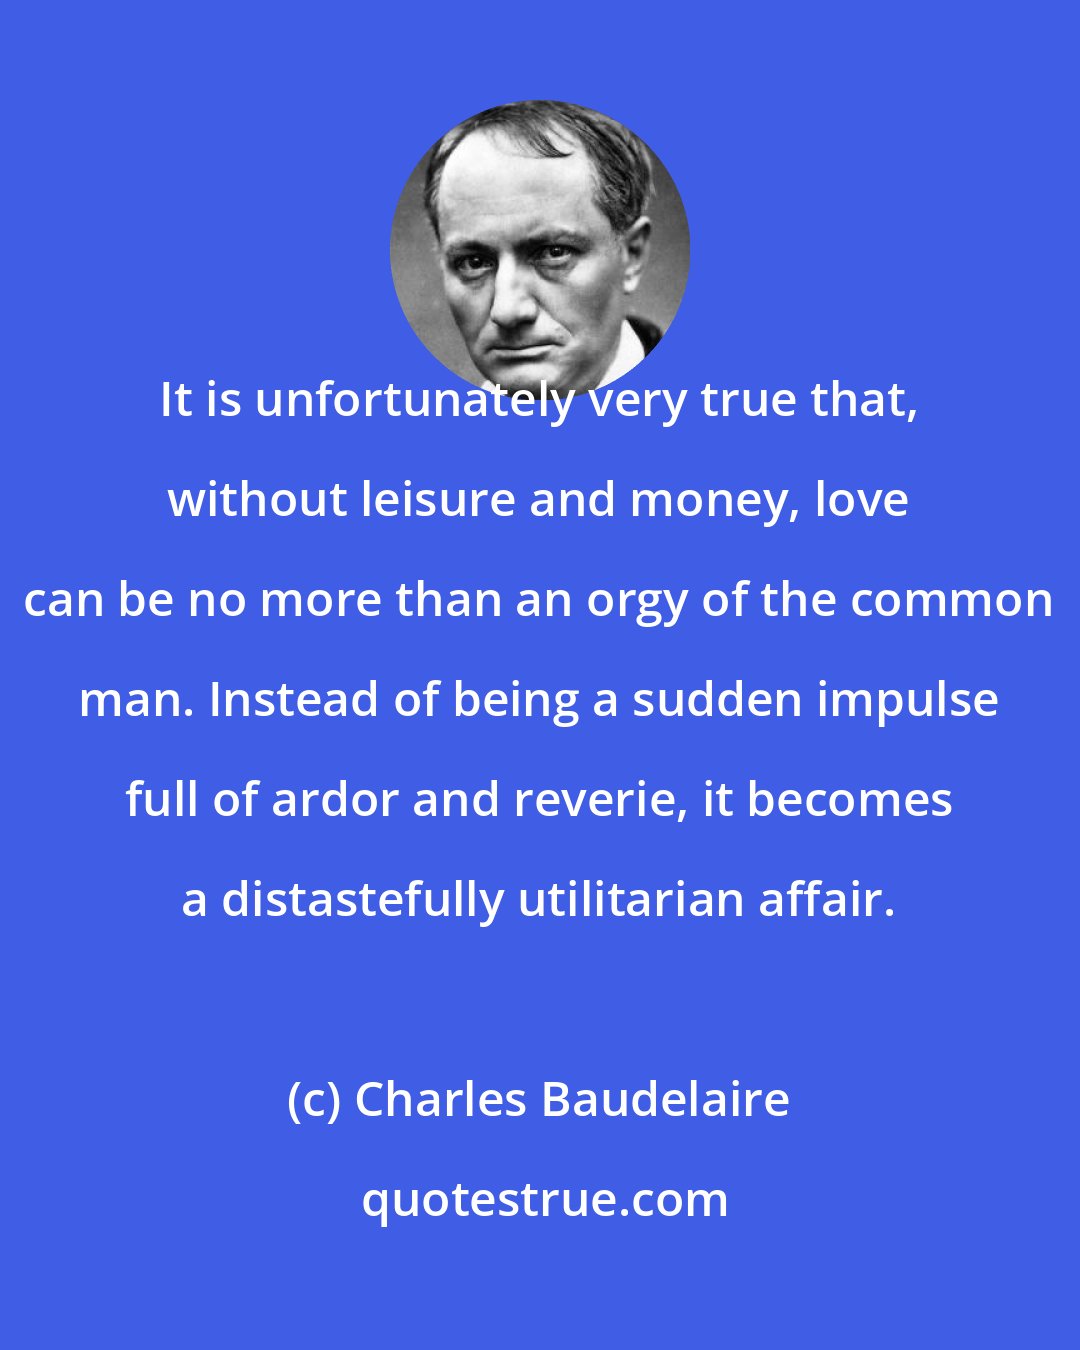 Charles Baudelaire: It is unfortunately very true that, without leisure and money, love can be no more than an orgy of the common man. Instead of being a sudden impulse full of ardor and reverie, it becomes a distastefully utilitarian affair.